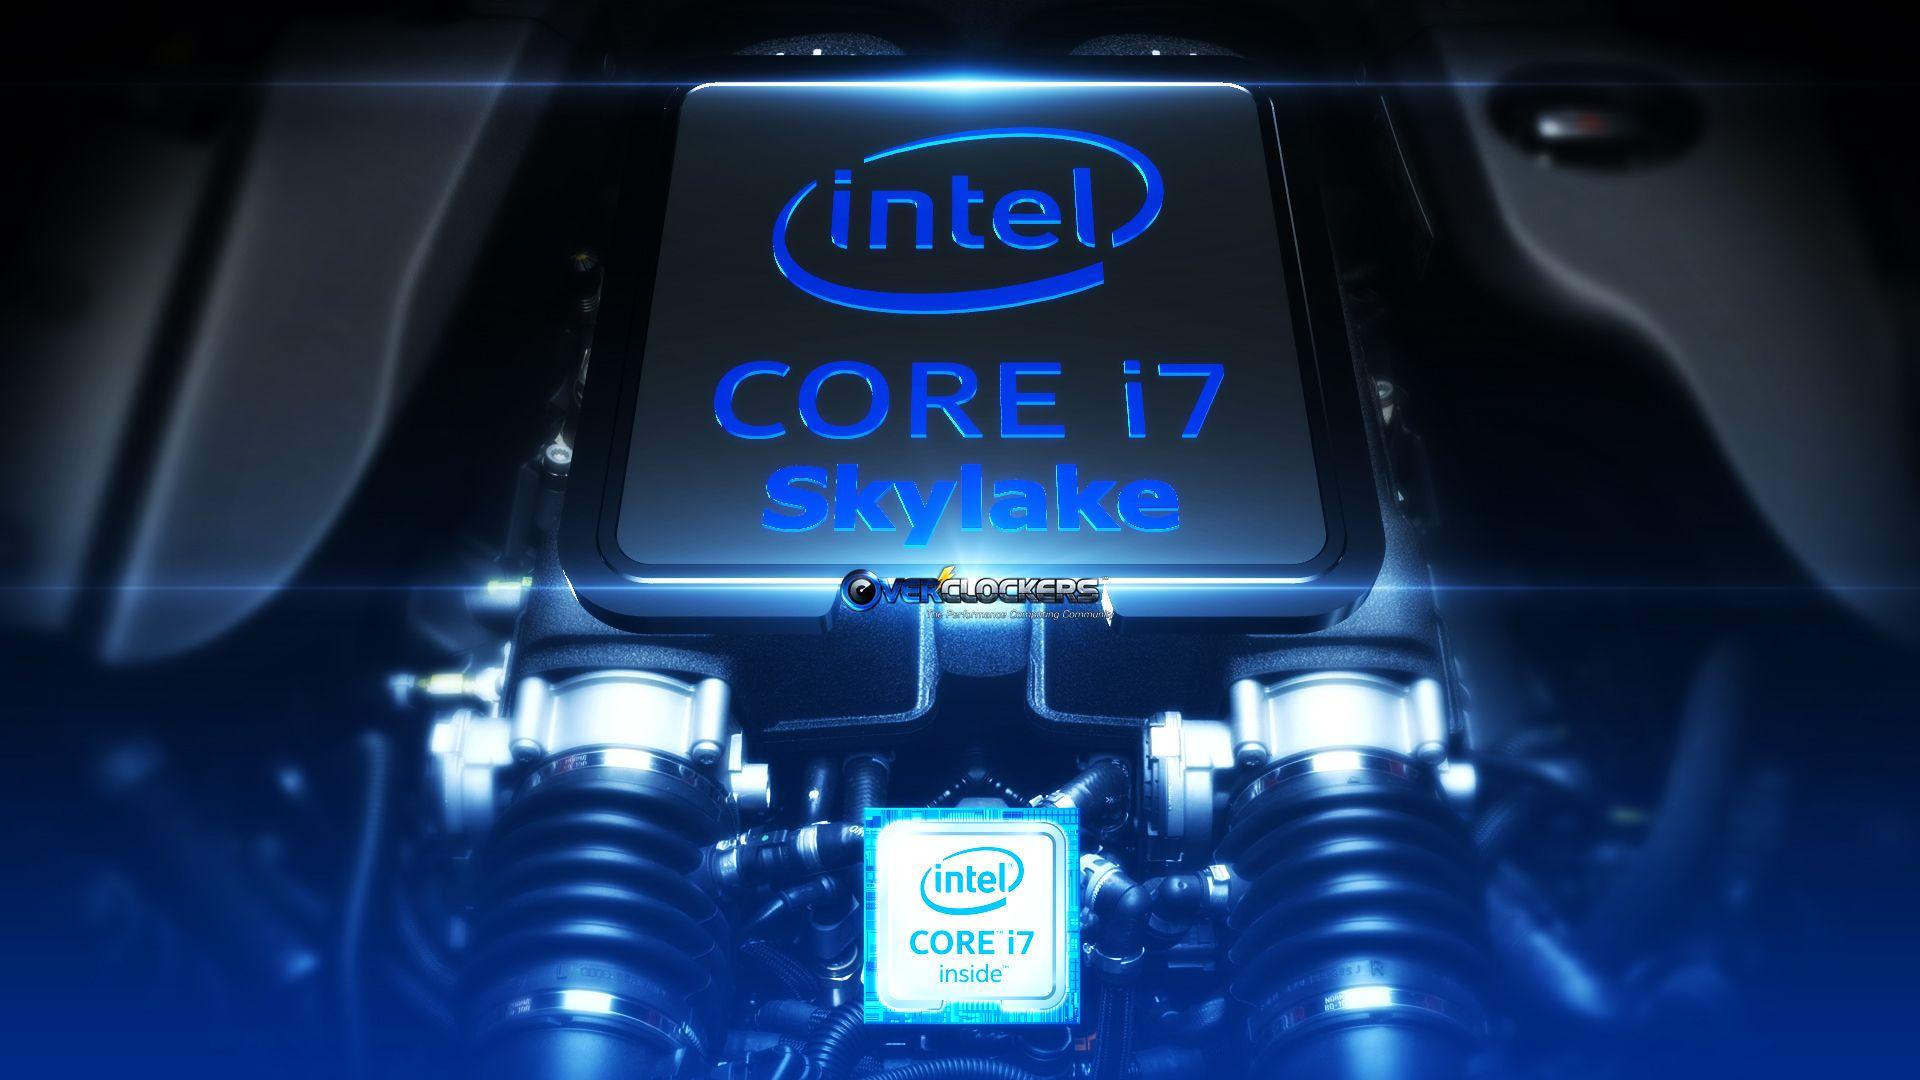 Intel Core I7 Wallpapers Top Free Intel Core I7 Backgrounds Wallpaperaccess 6683